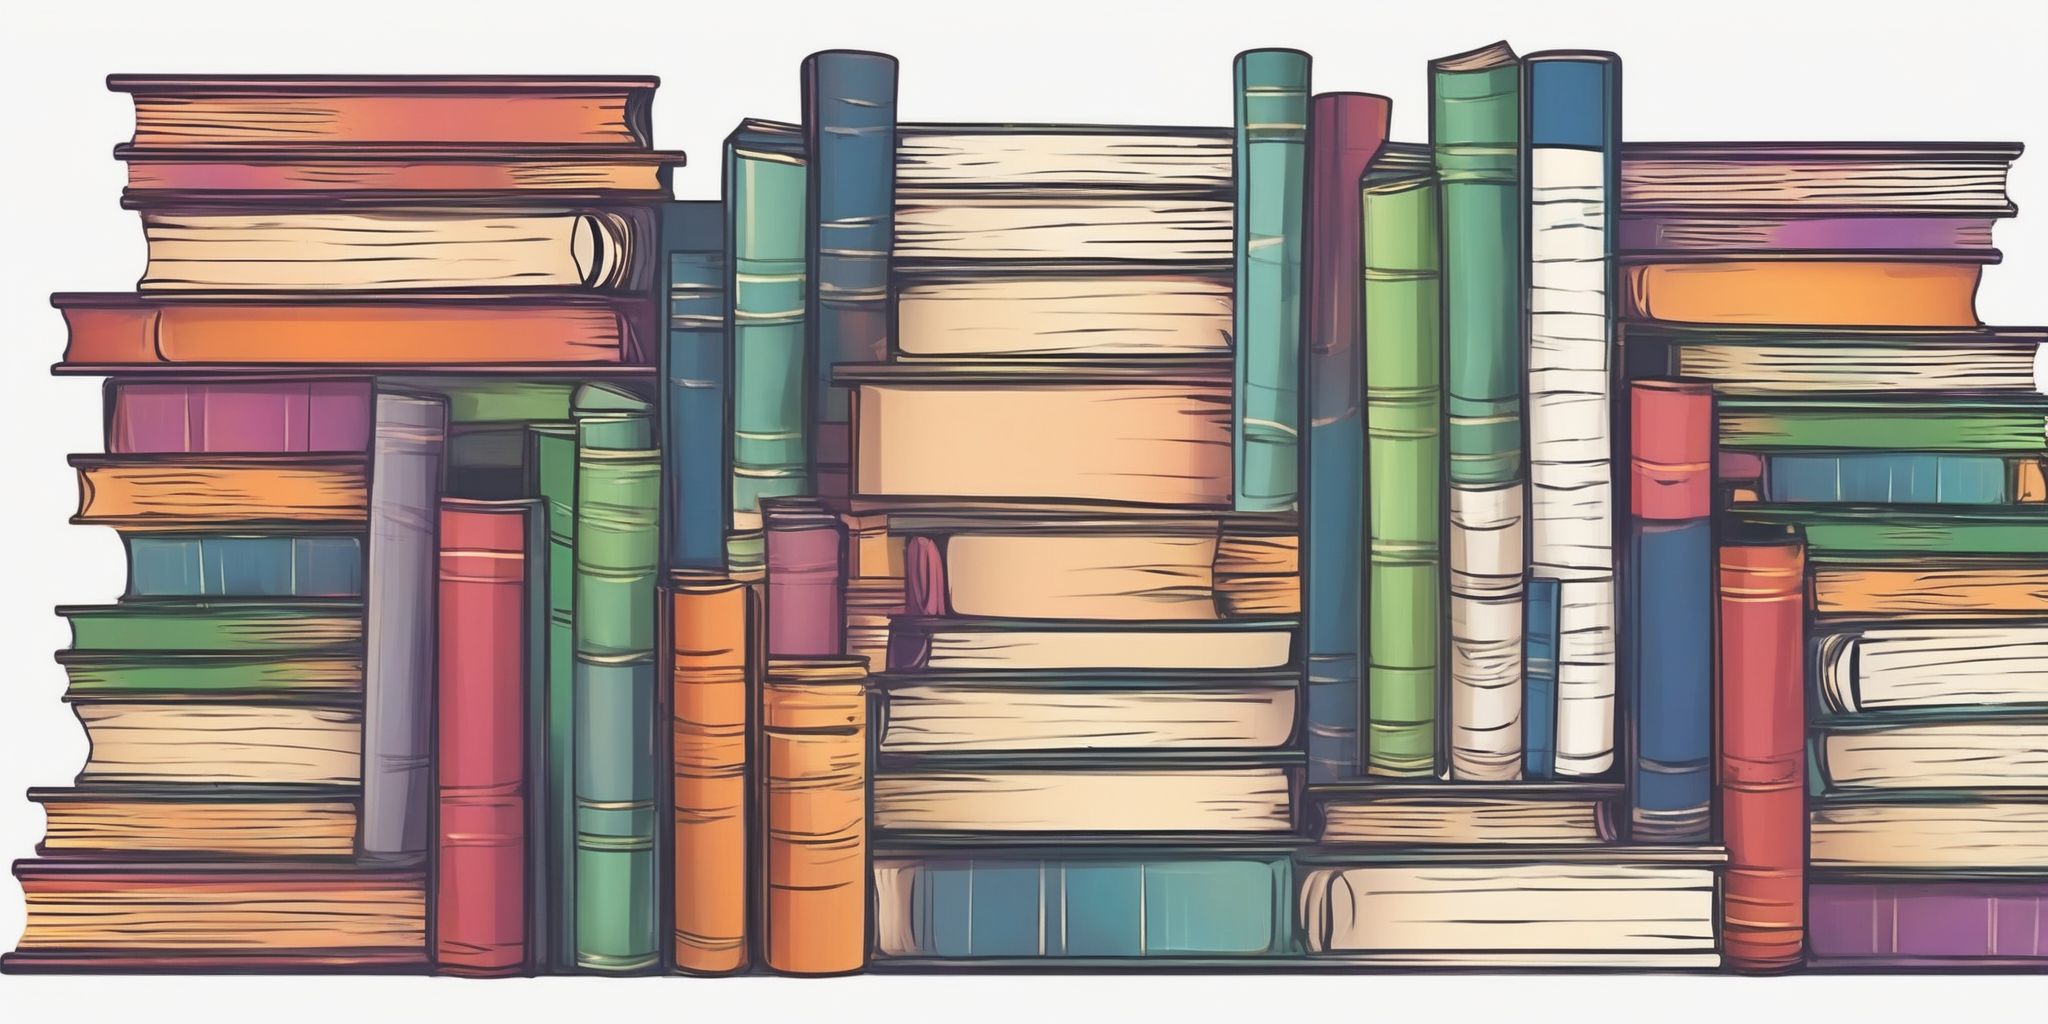 Stack of books in illustration style with gradients and white background